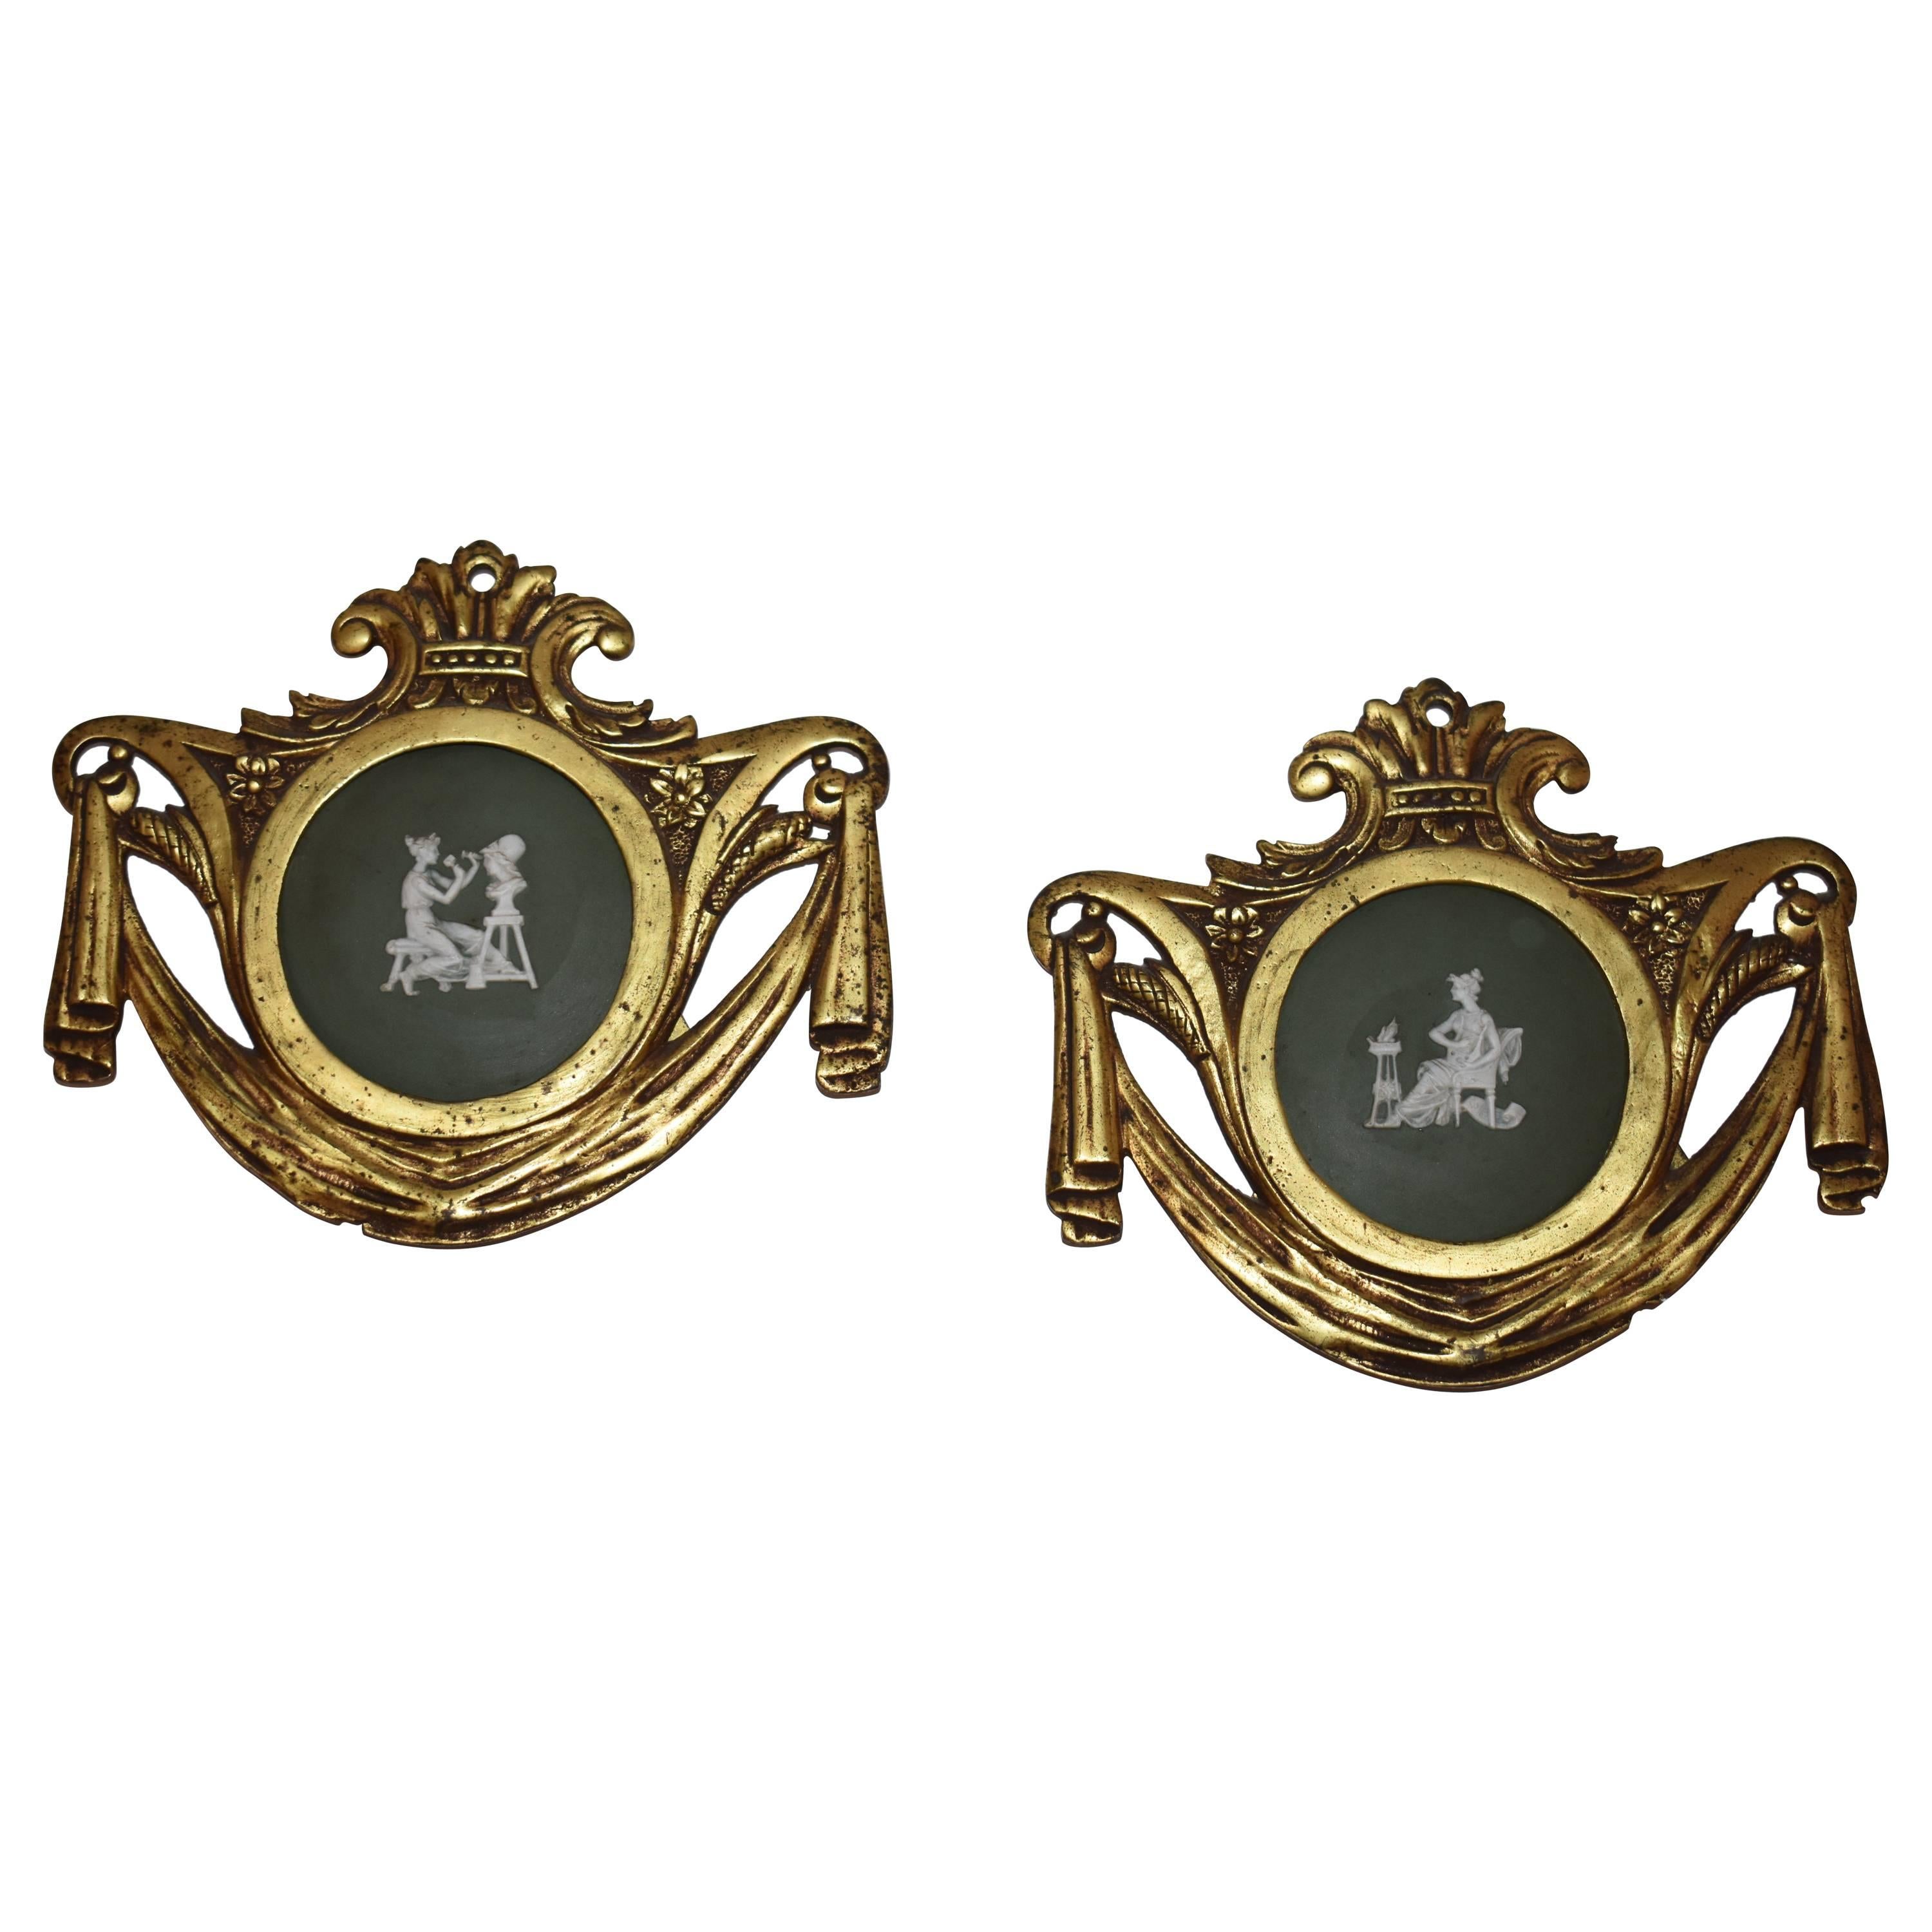 Miniature Jasperware Ornament Plaques in the Style of Wedgwood